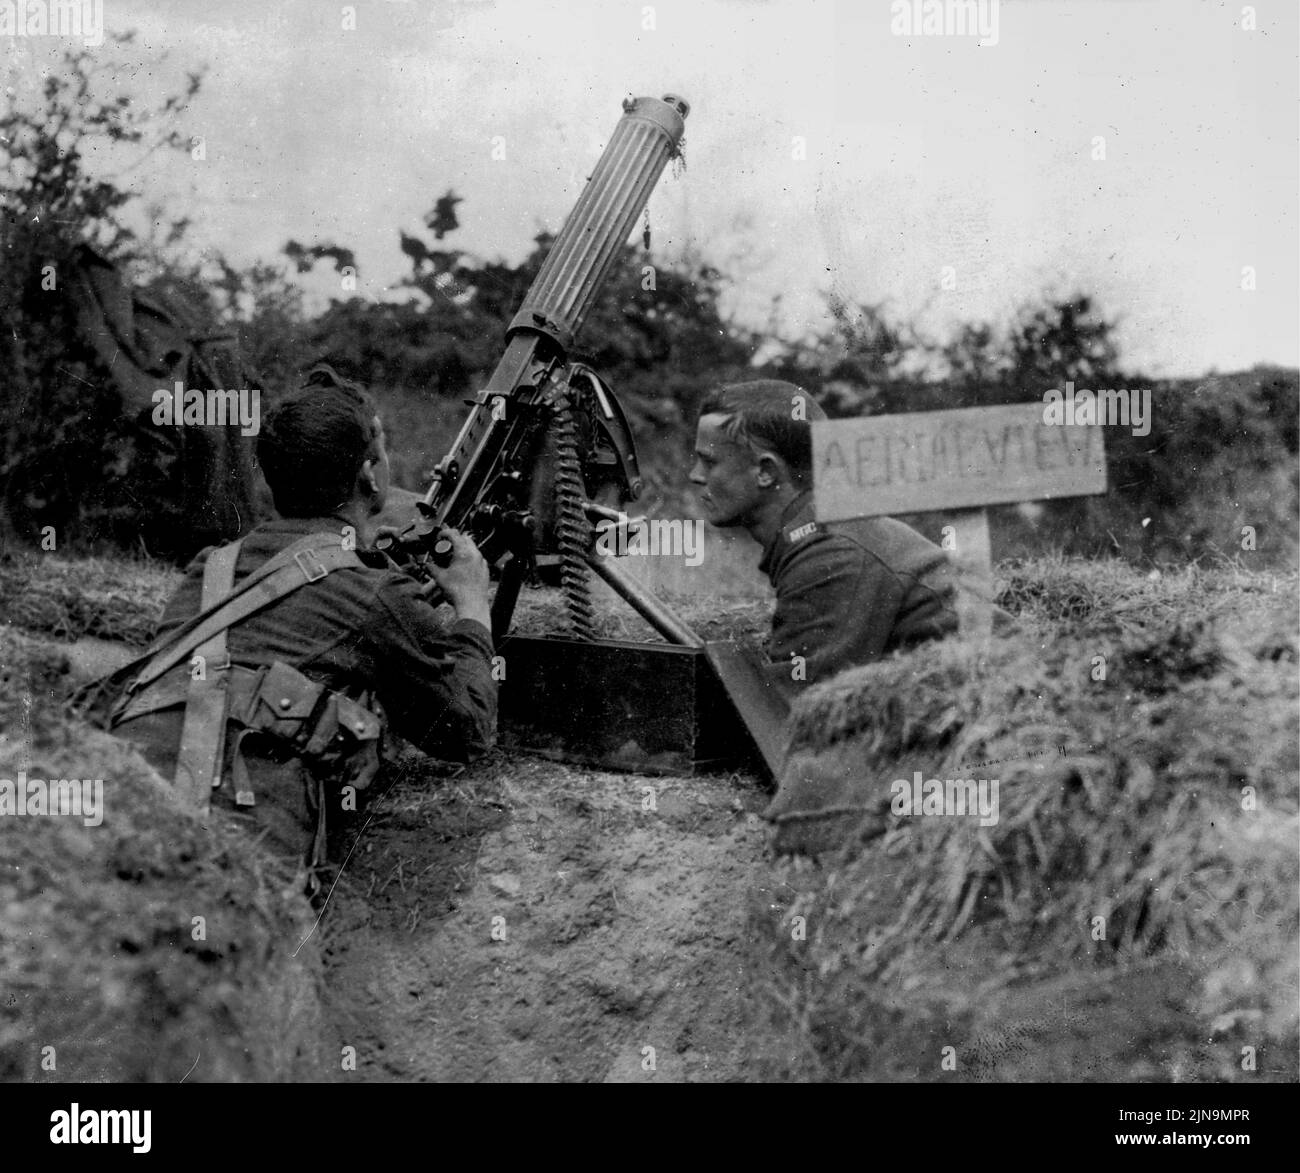 WESTERN FRONT, BELGIUM - circa 1916 - British soldiers man a Vickers machine gun position on the Western Front during World War I. Called 'Aerial View Stock Photo